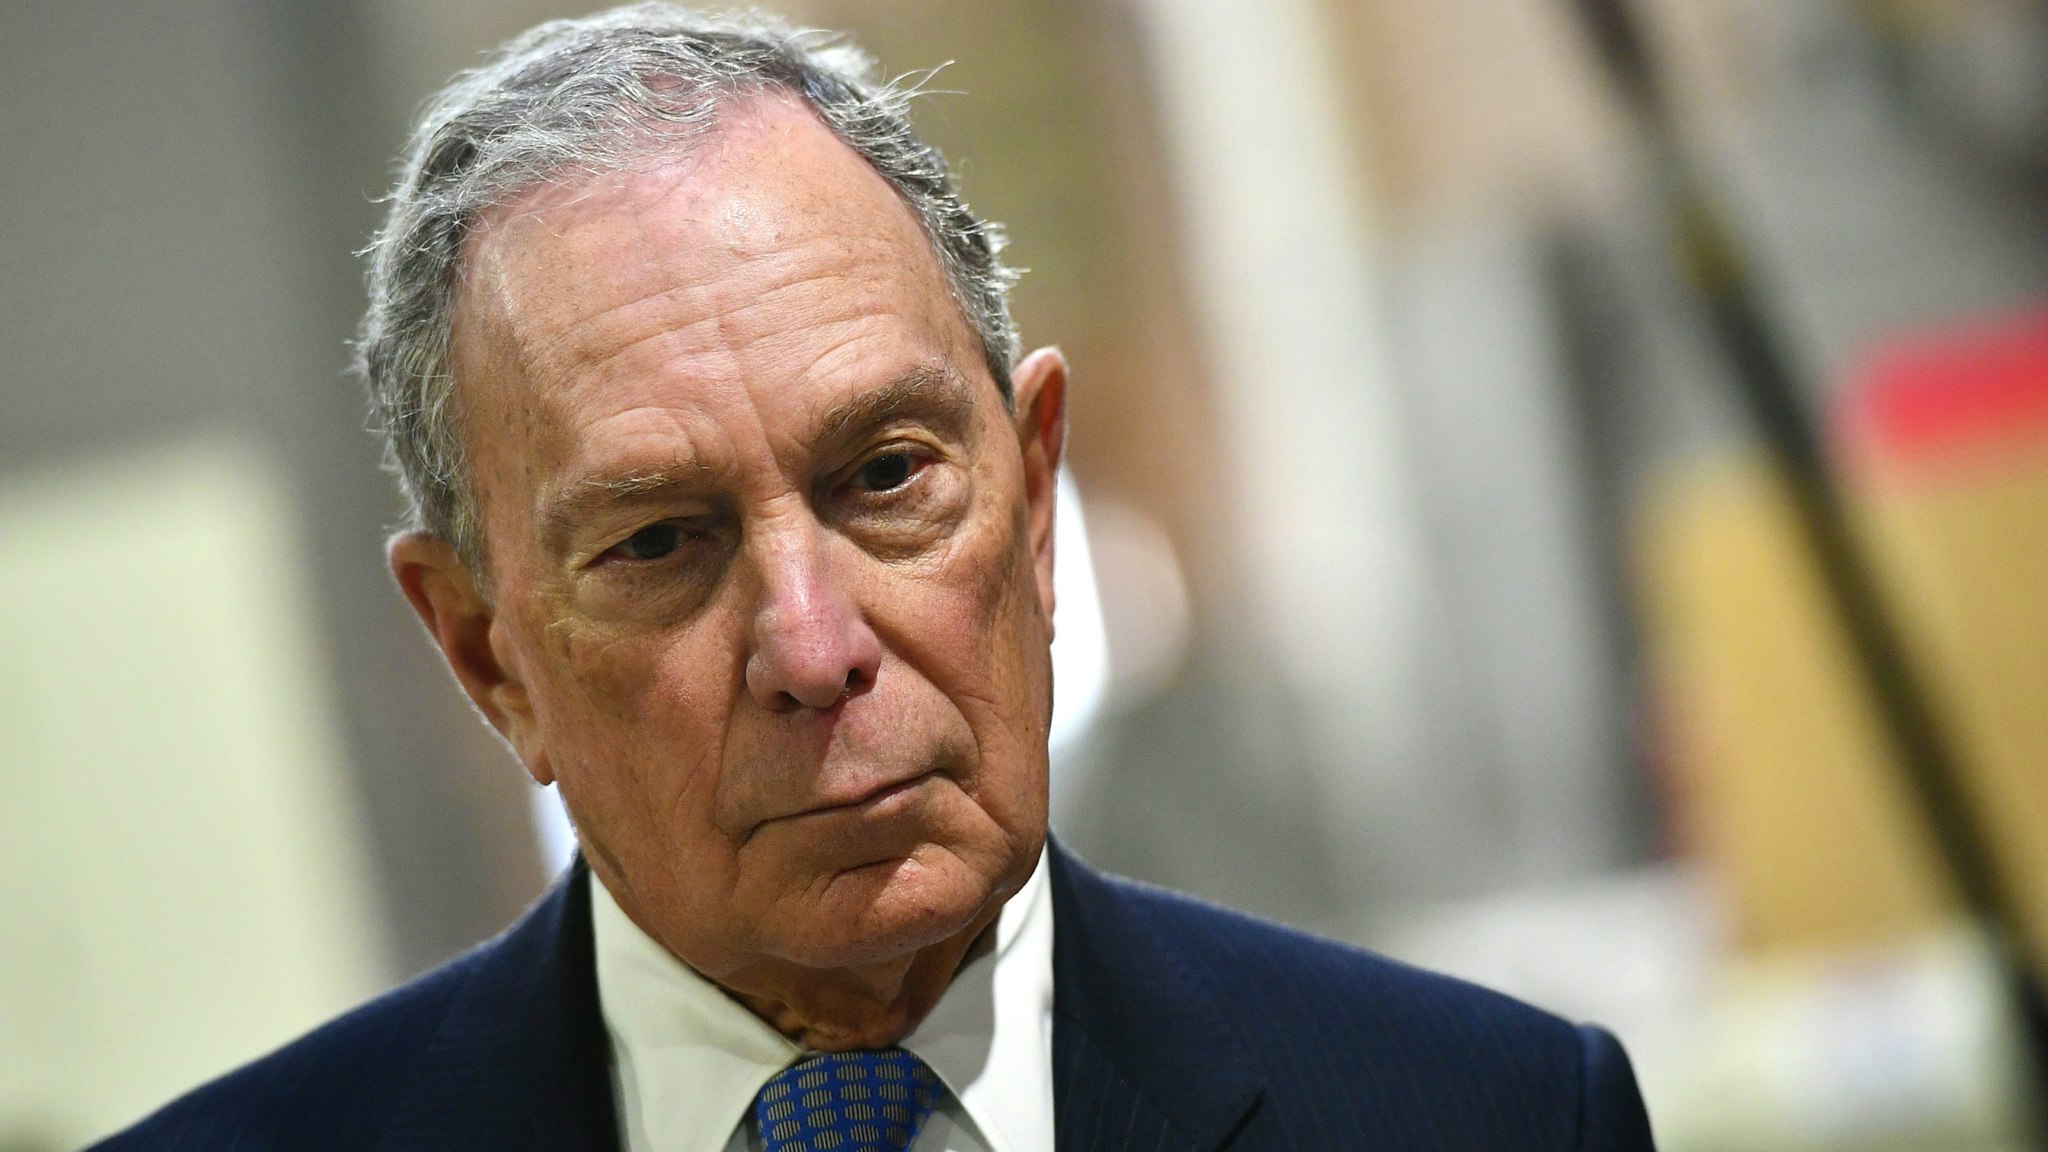 US Democratic Presidential candidate, Mike Bloomberg, looks on while visiting 'Building Momentum', a veteran owned business in Alexandria, Virginia on February 7, 2020.